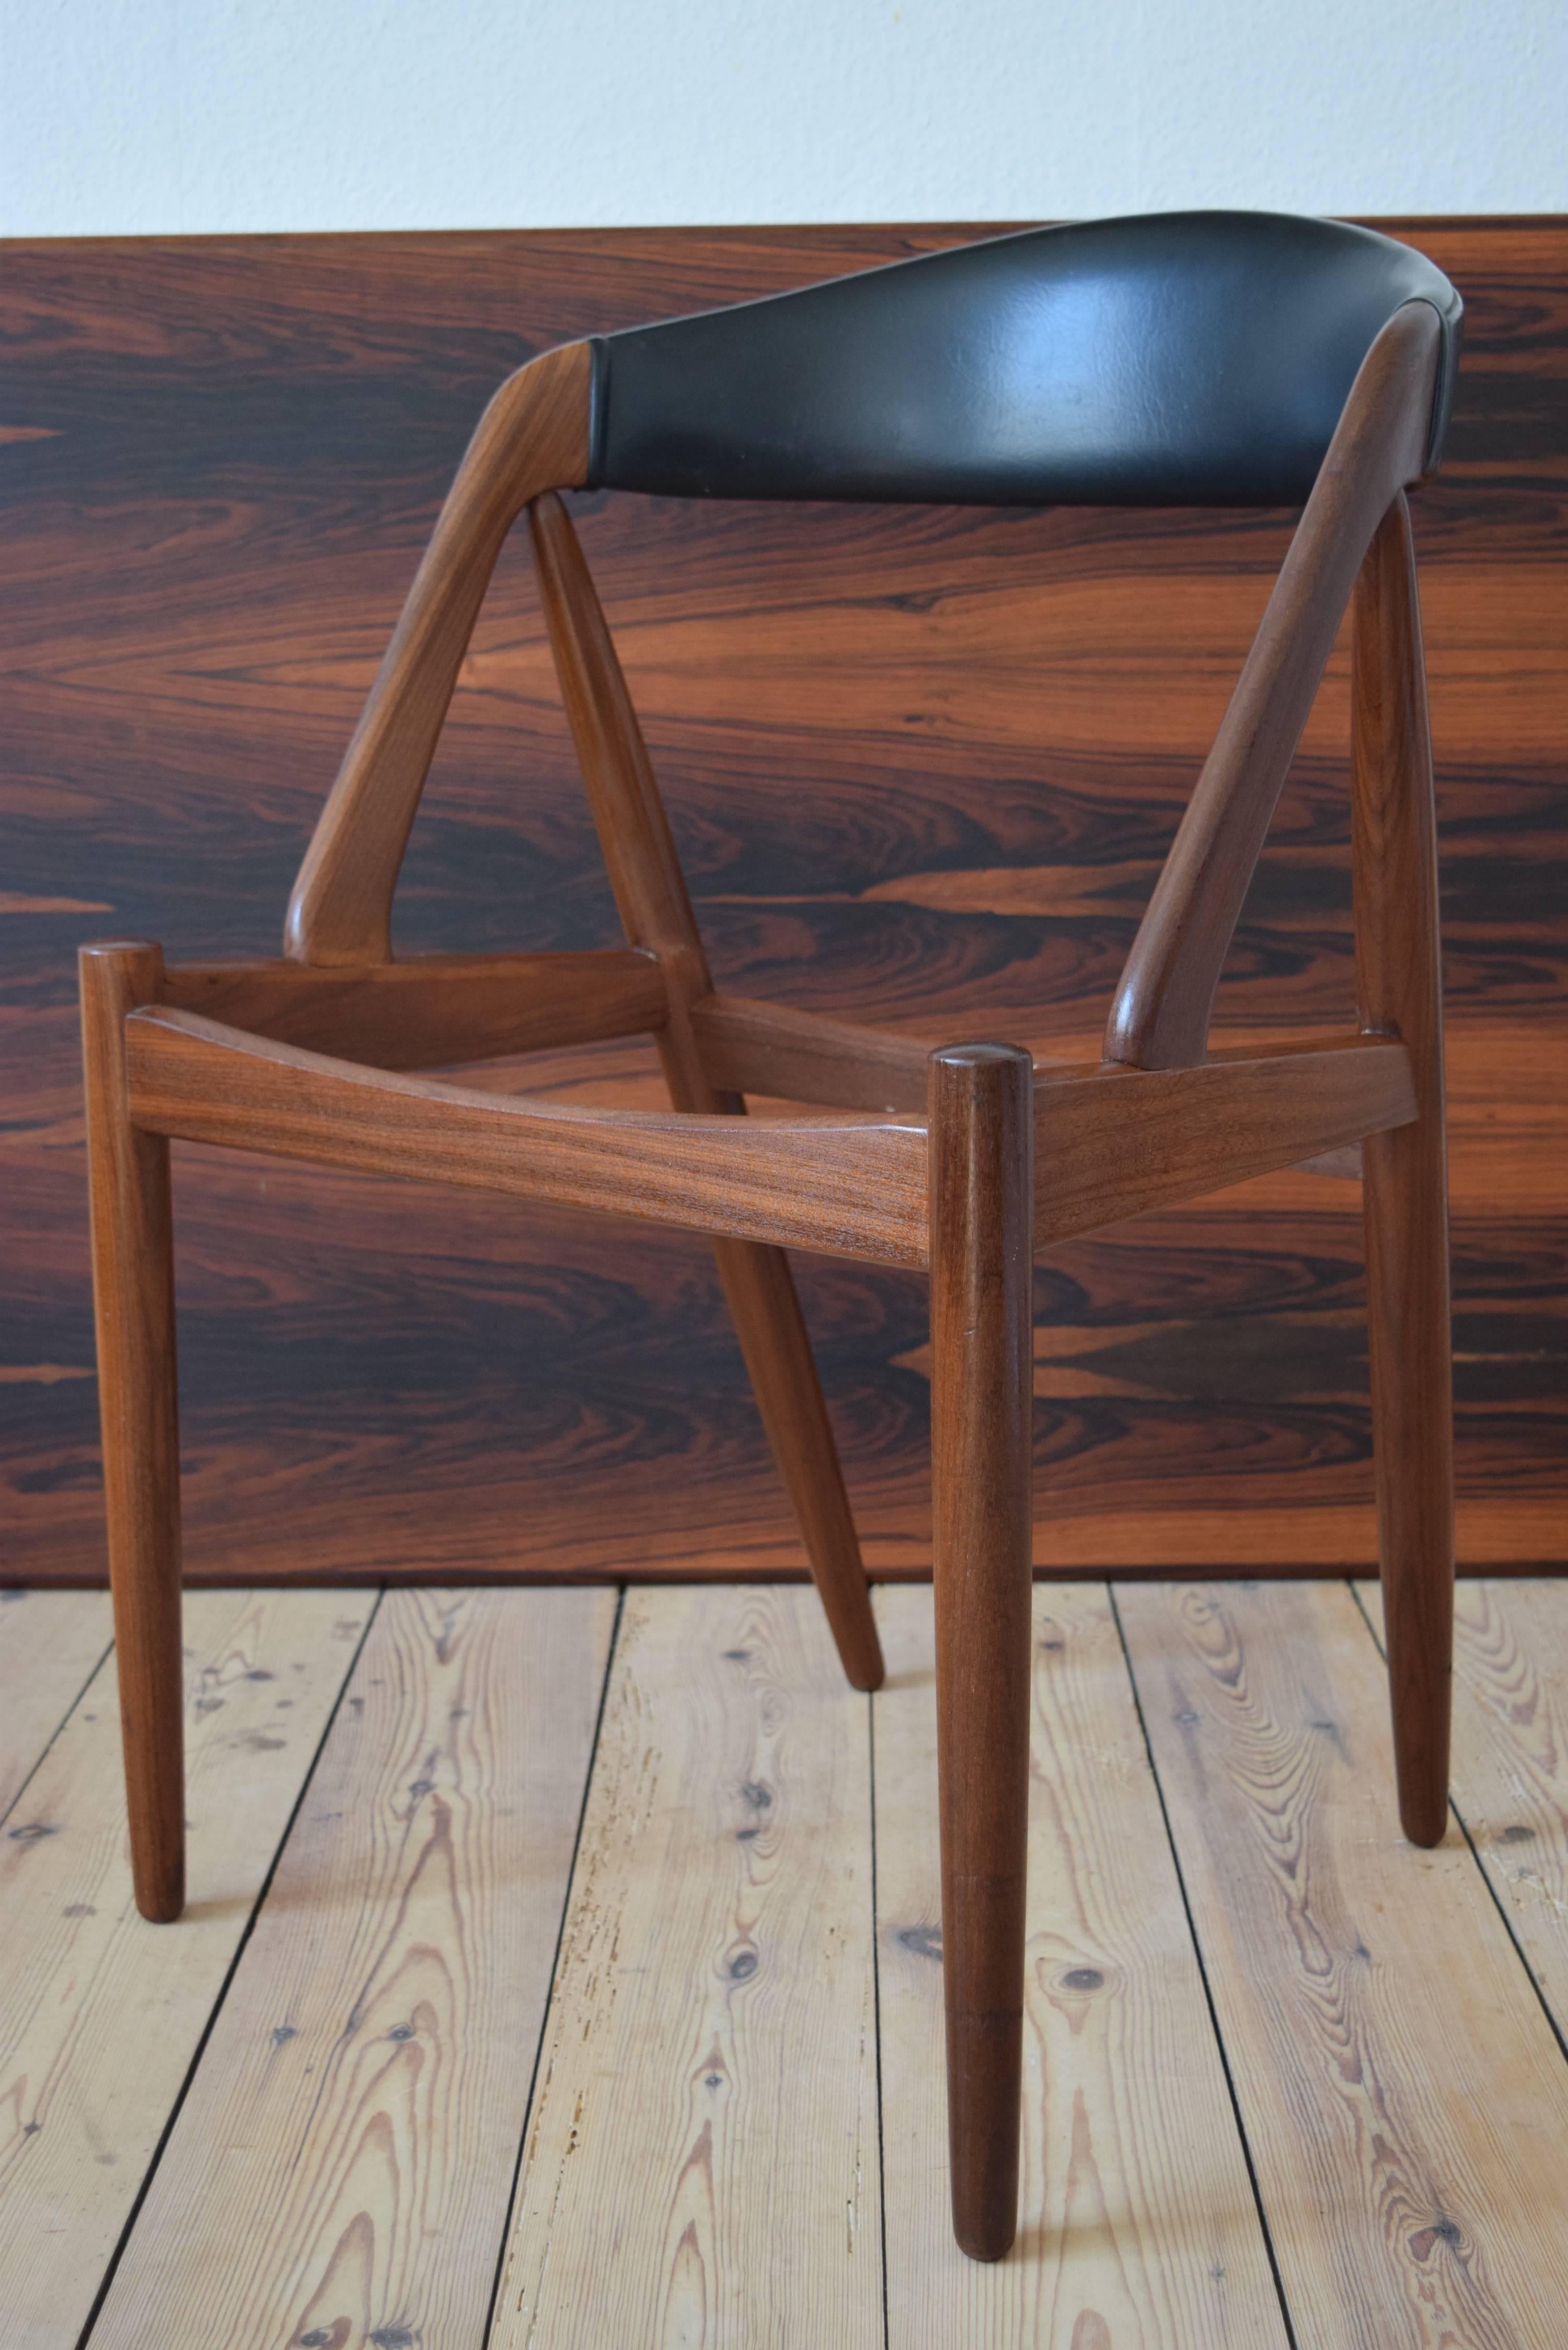 Set of three dining #31 chairs by Kai Kristiansen for Schou Møbelfabrik, Denmark. The frame is made of teak and the seats and backrests are covered in the original black skai. This model features a deep curved backrest for extra comfort. We can